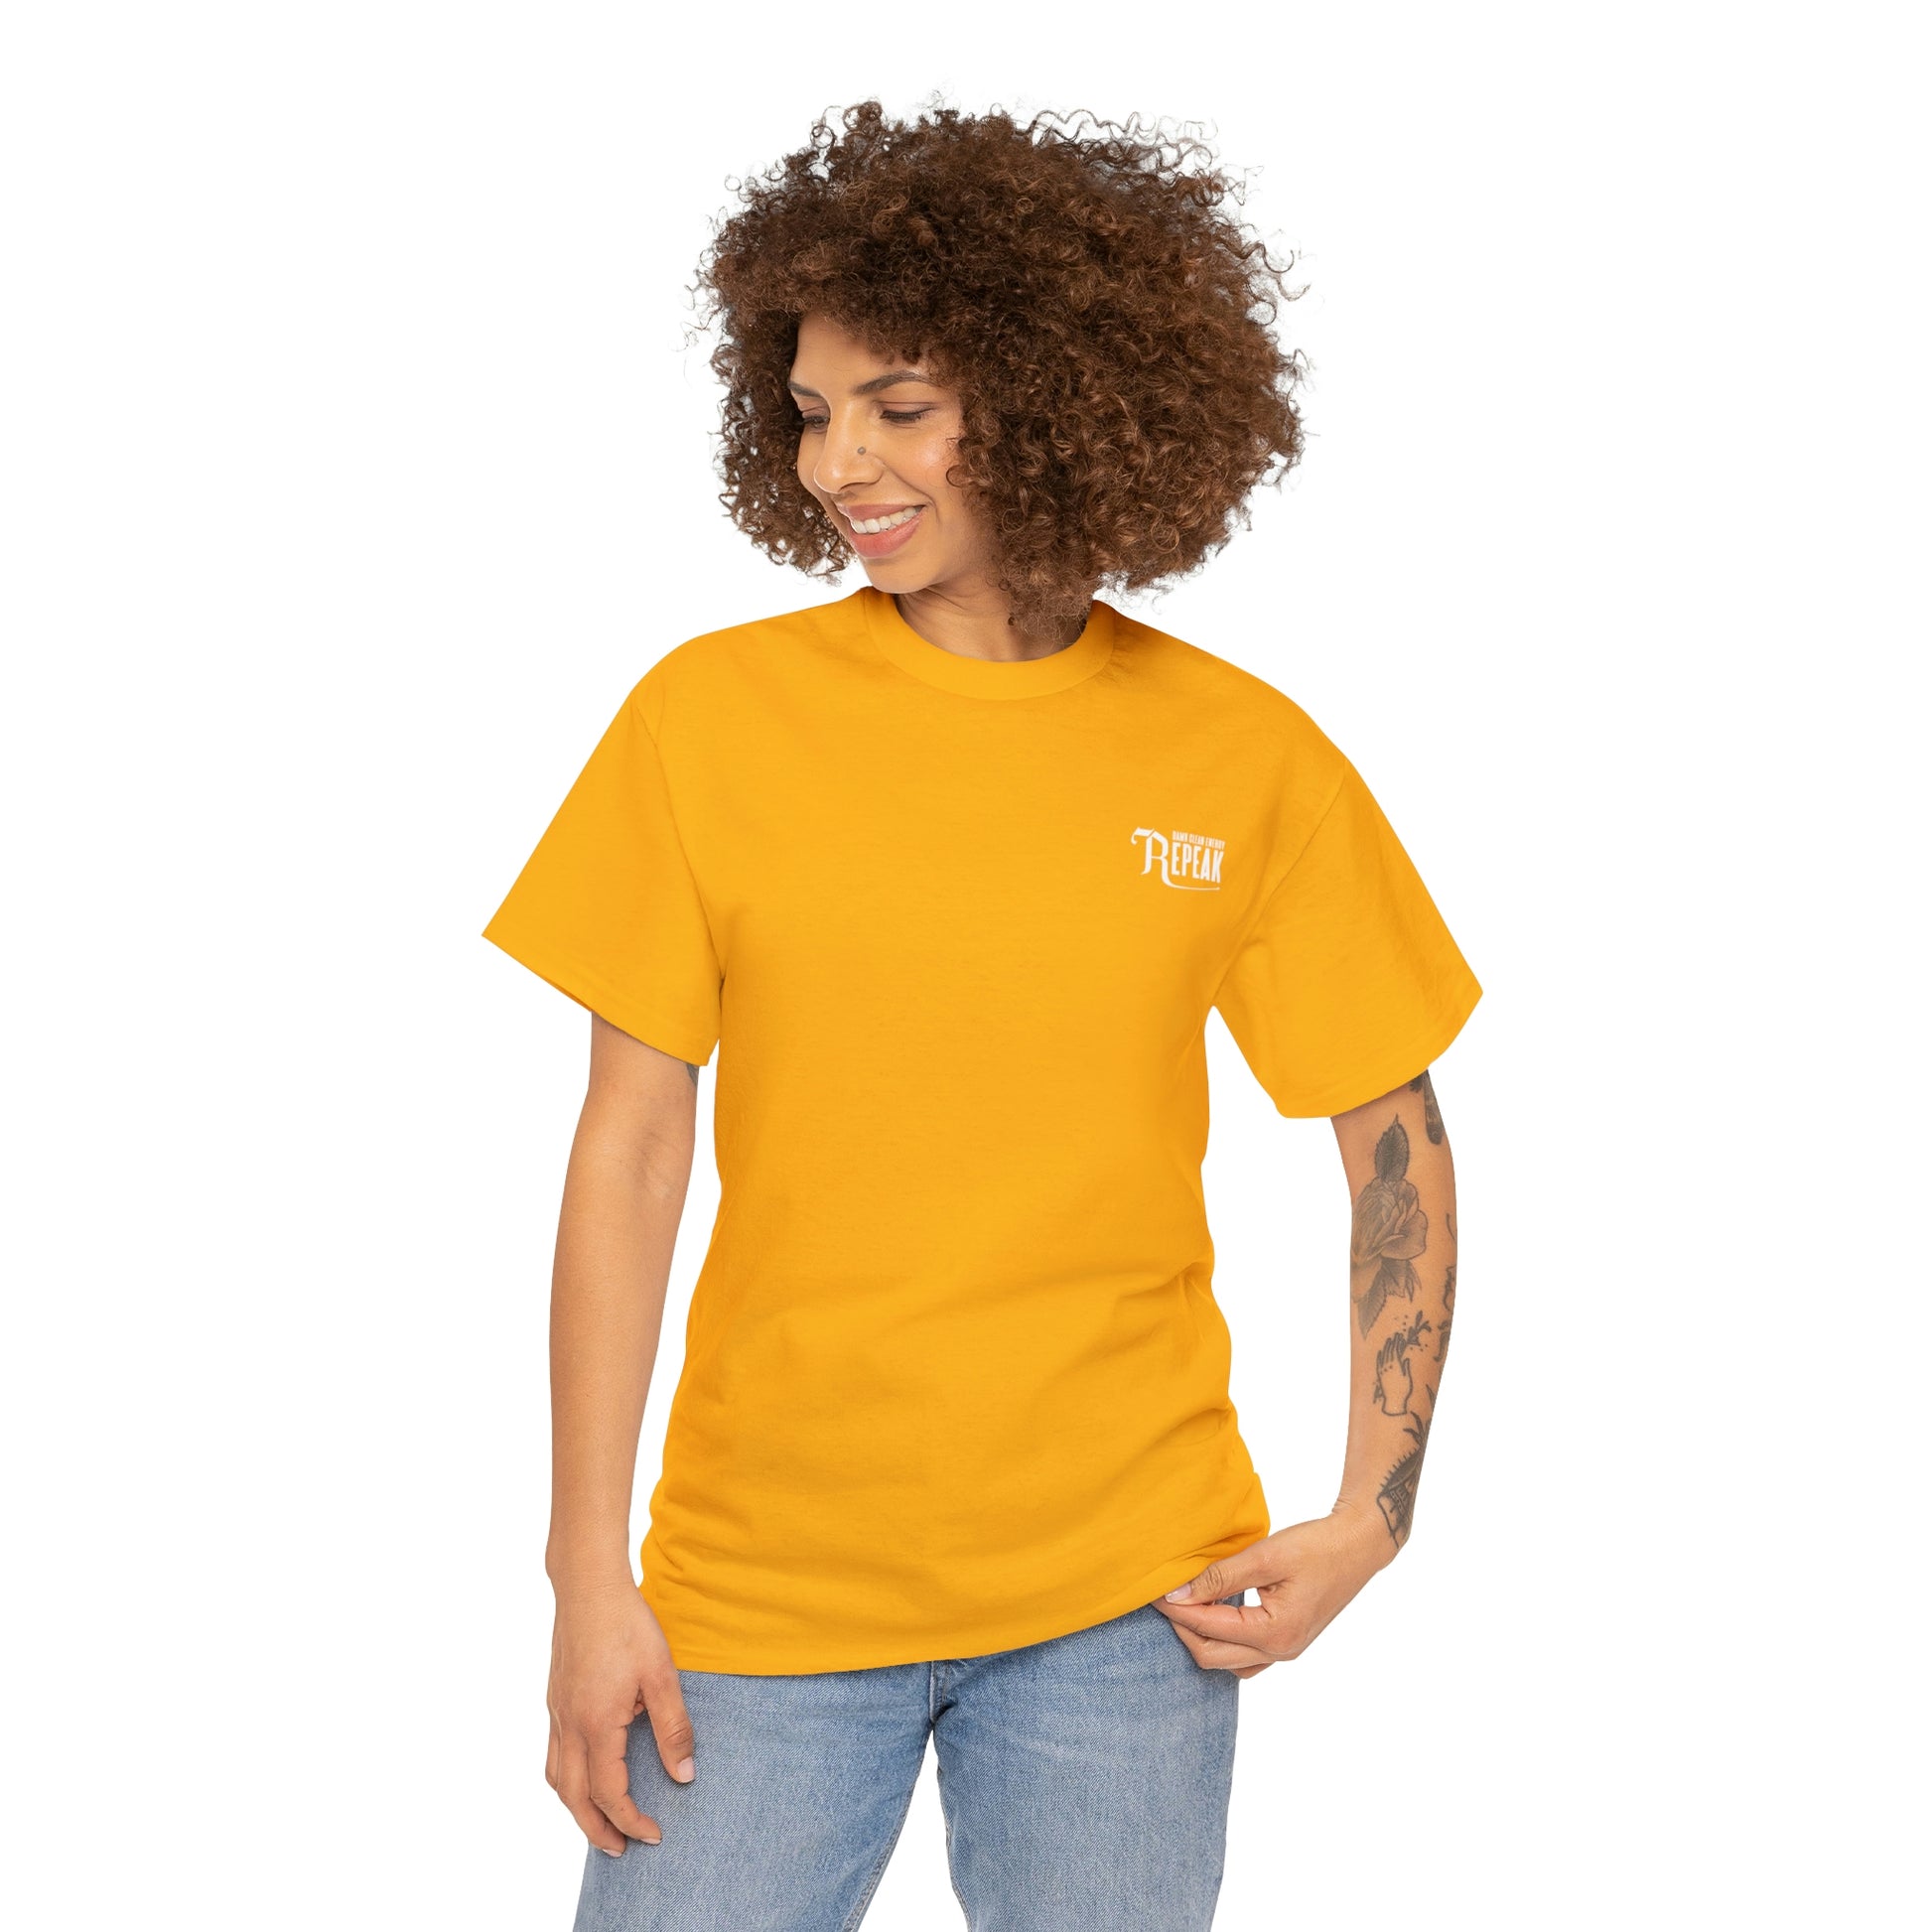 repeak energy drink gold t-shirt, front side with female model